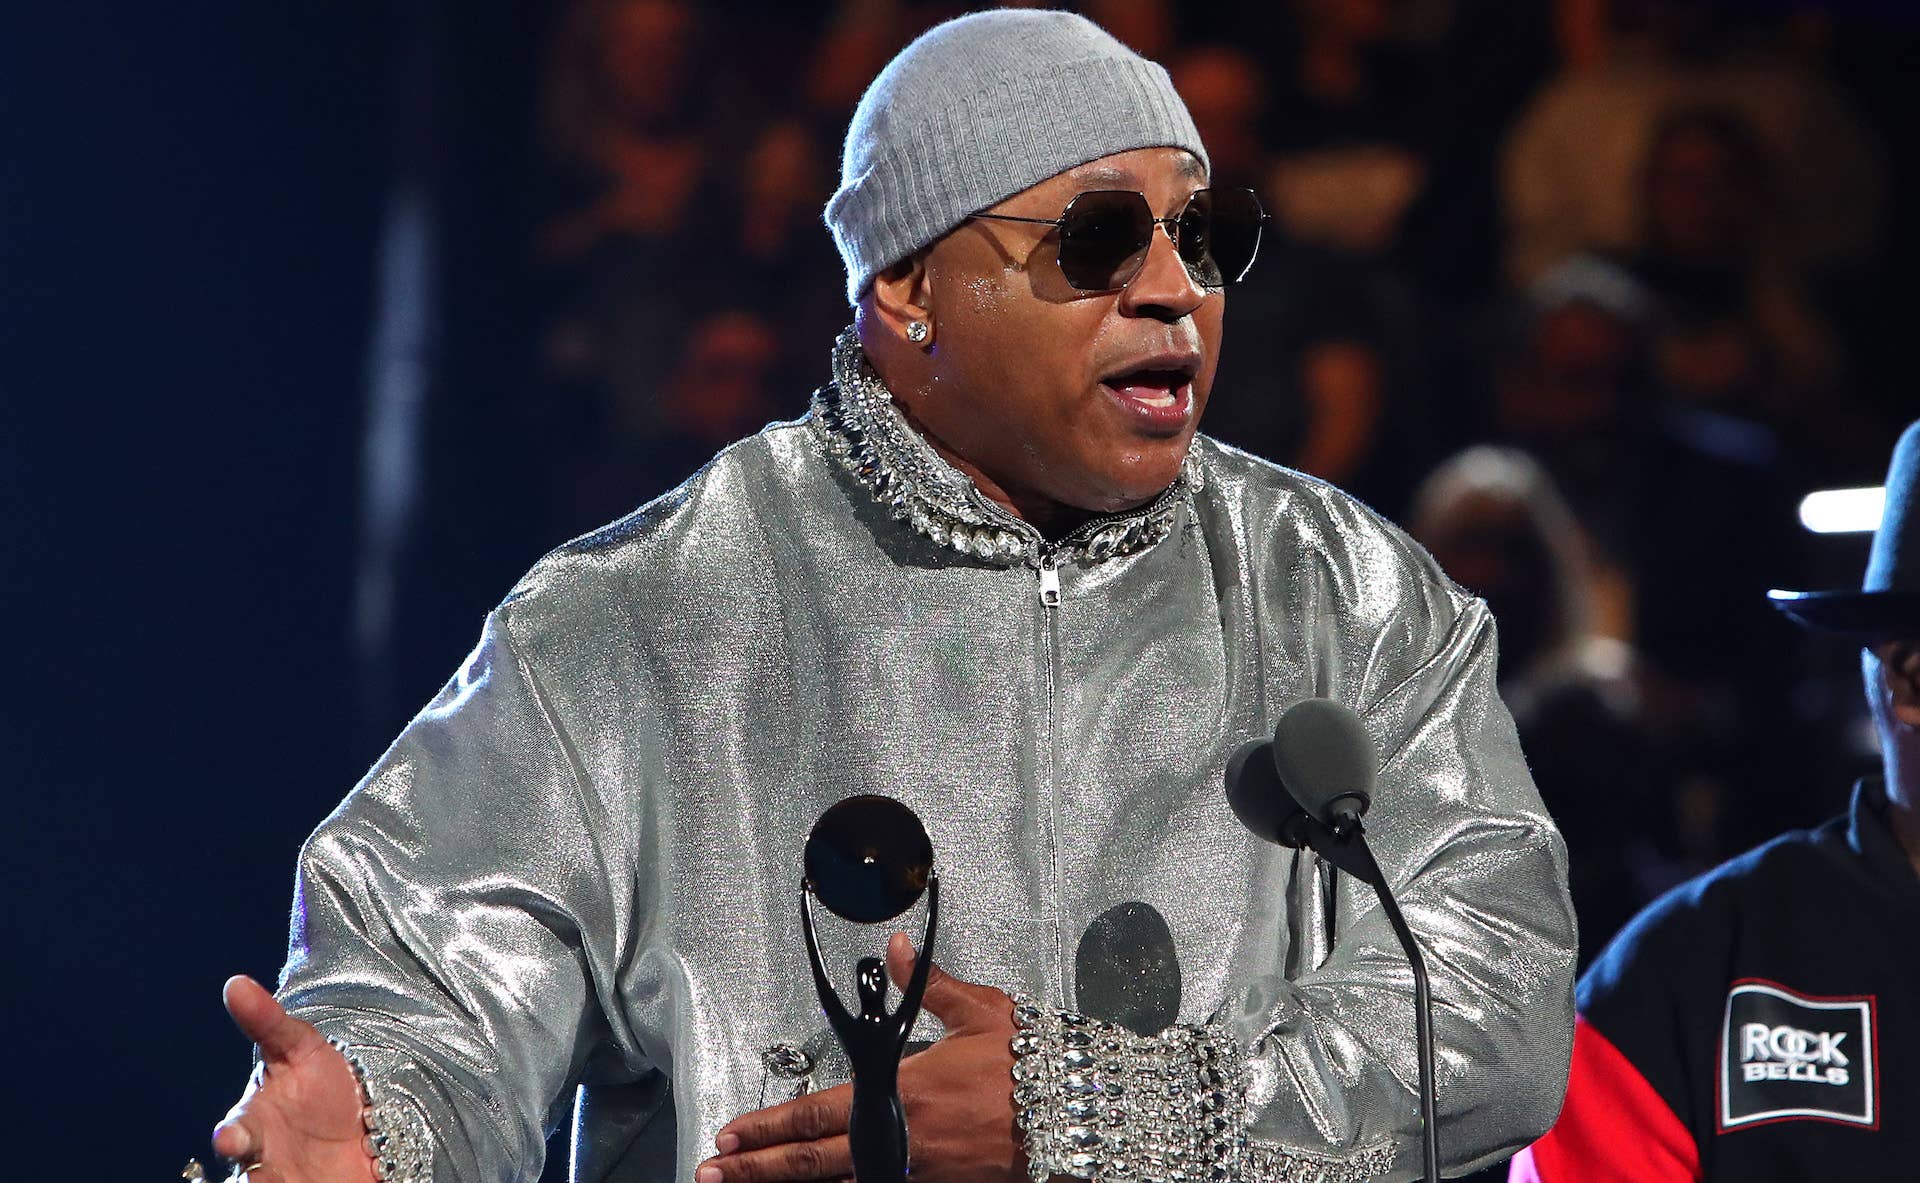 LL Cool J speaking at The Rock and Roll Hall of Fame Induction